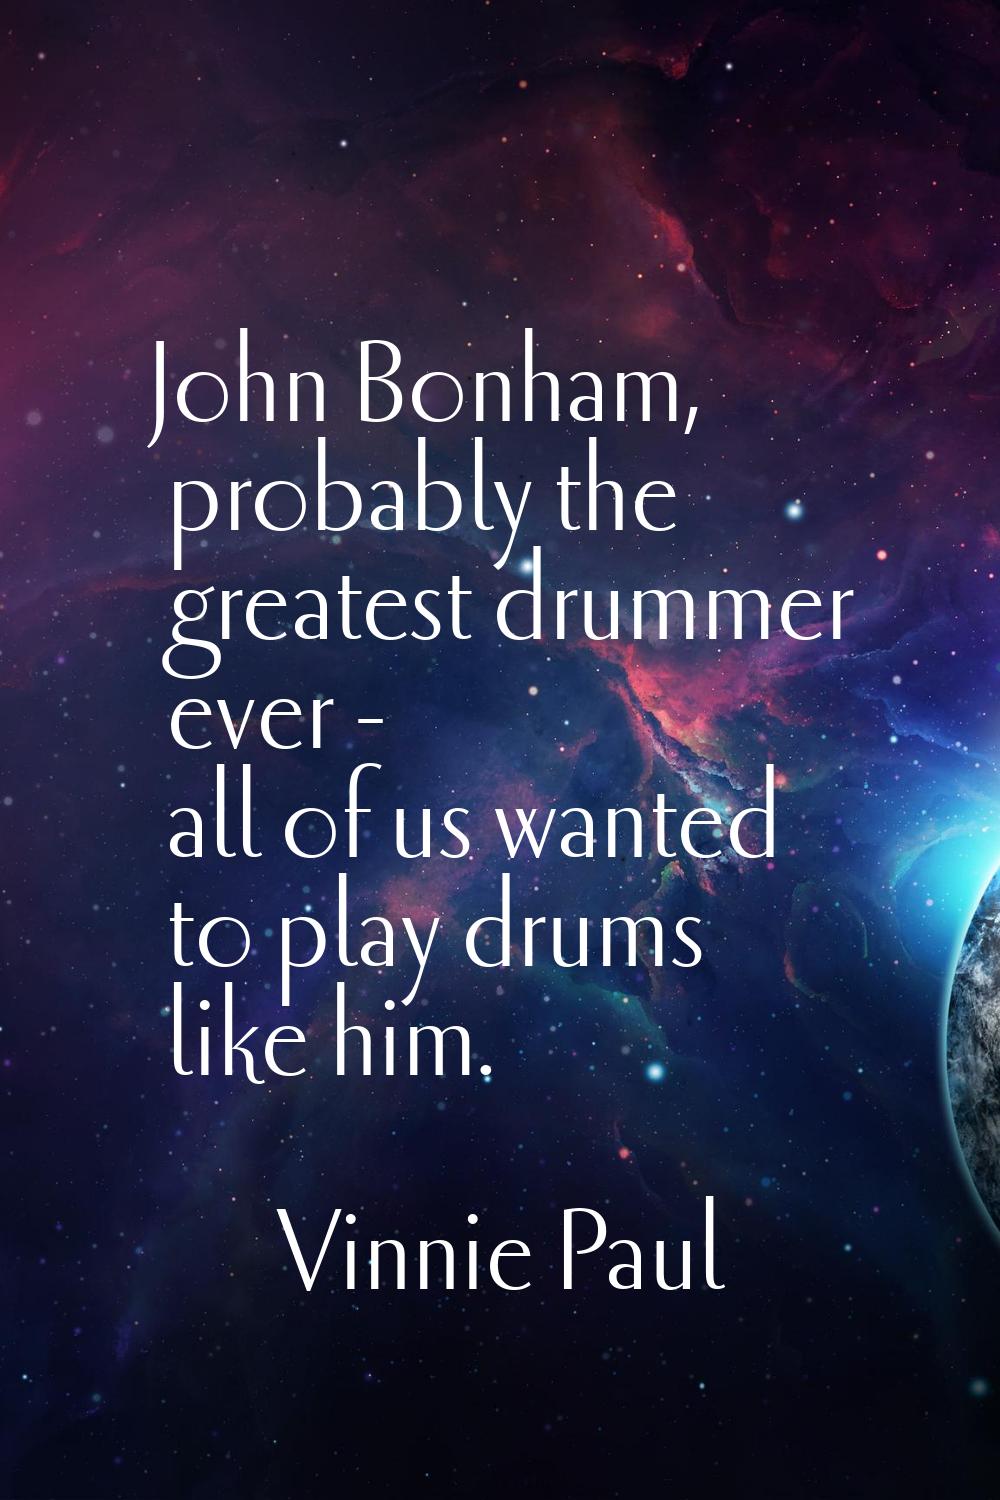 John Bonham, probably the greatest drummer ever - all of us wanted to play drums like him.